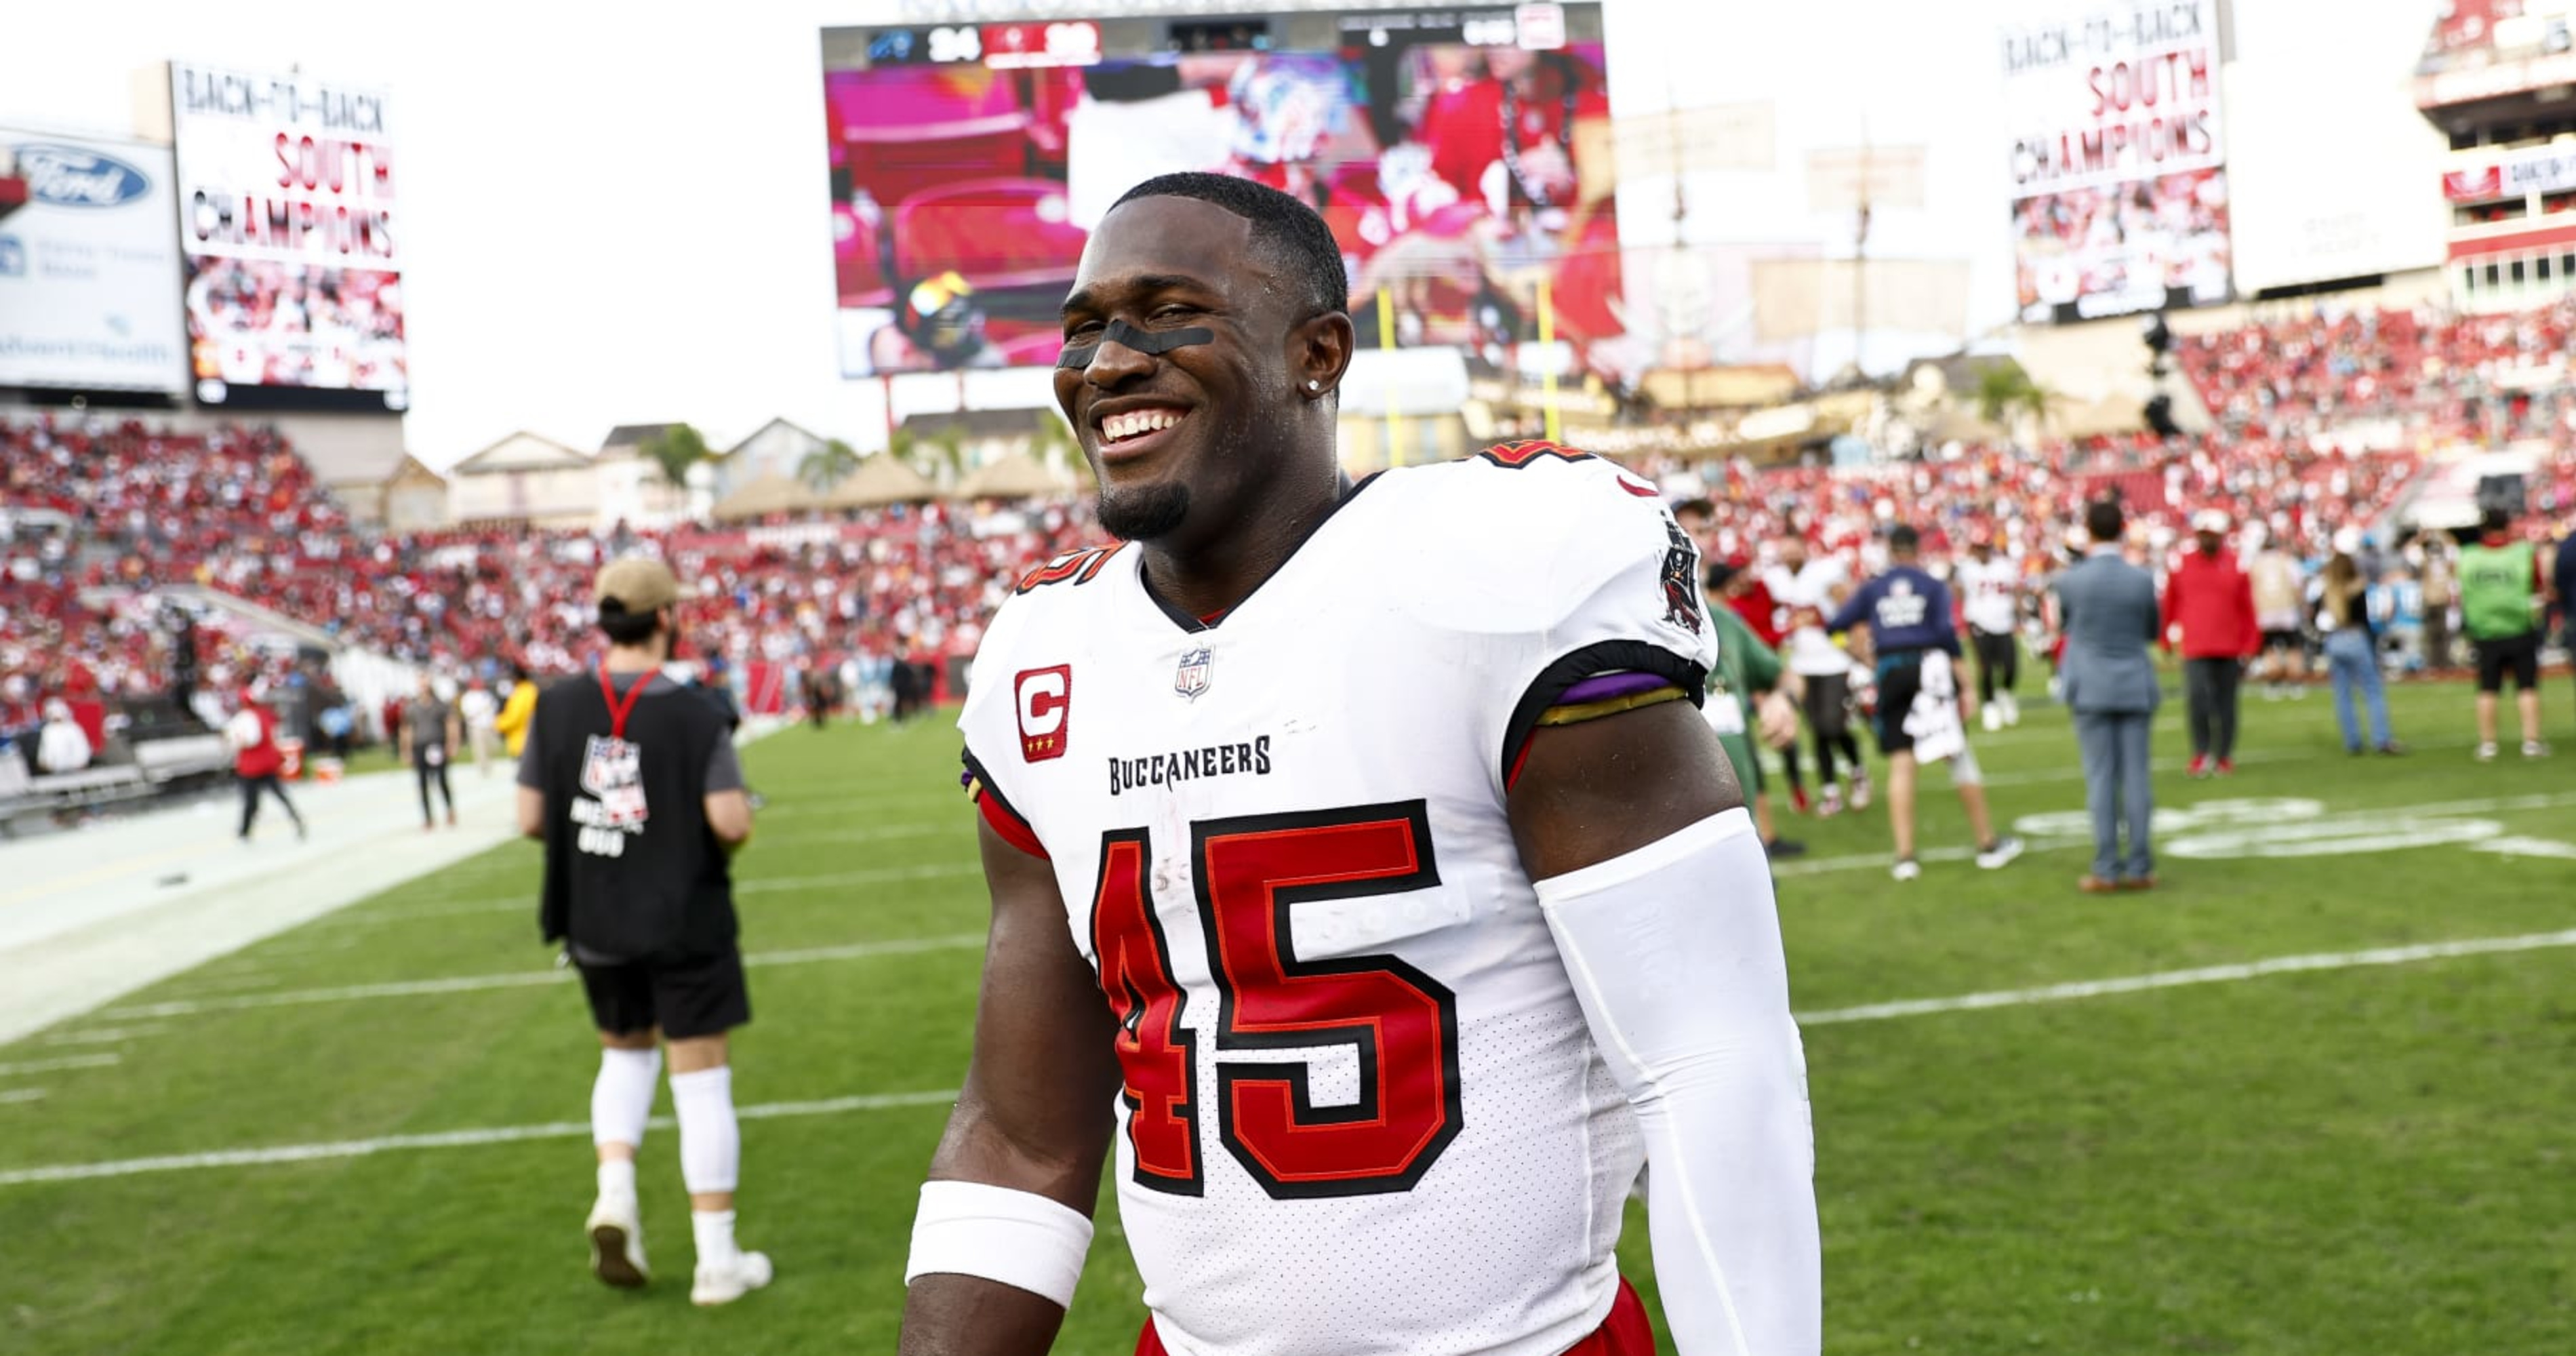 Landing Spots for Buccaneers LB Devin White After Requesting Trade